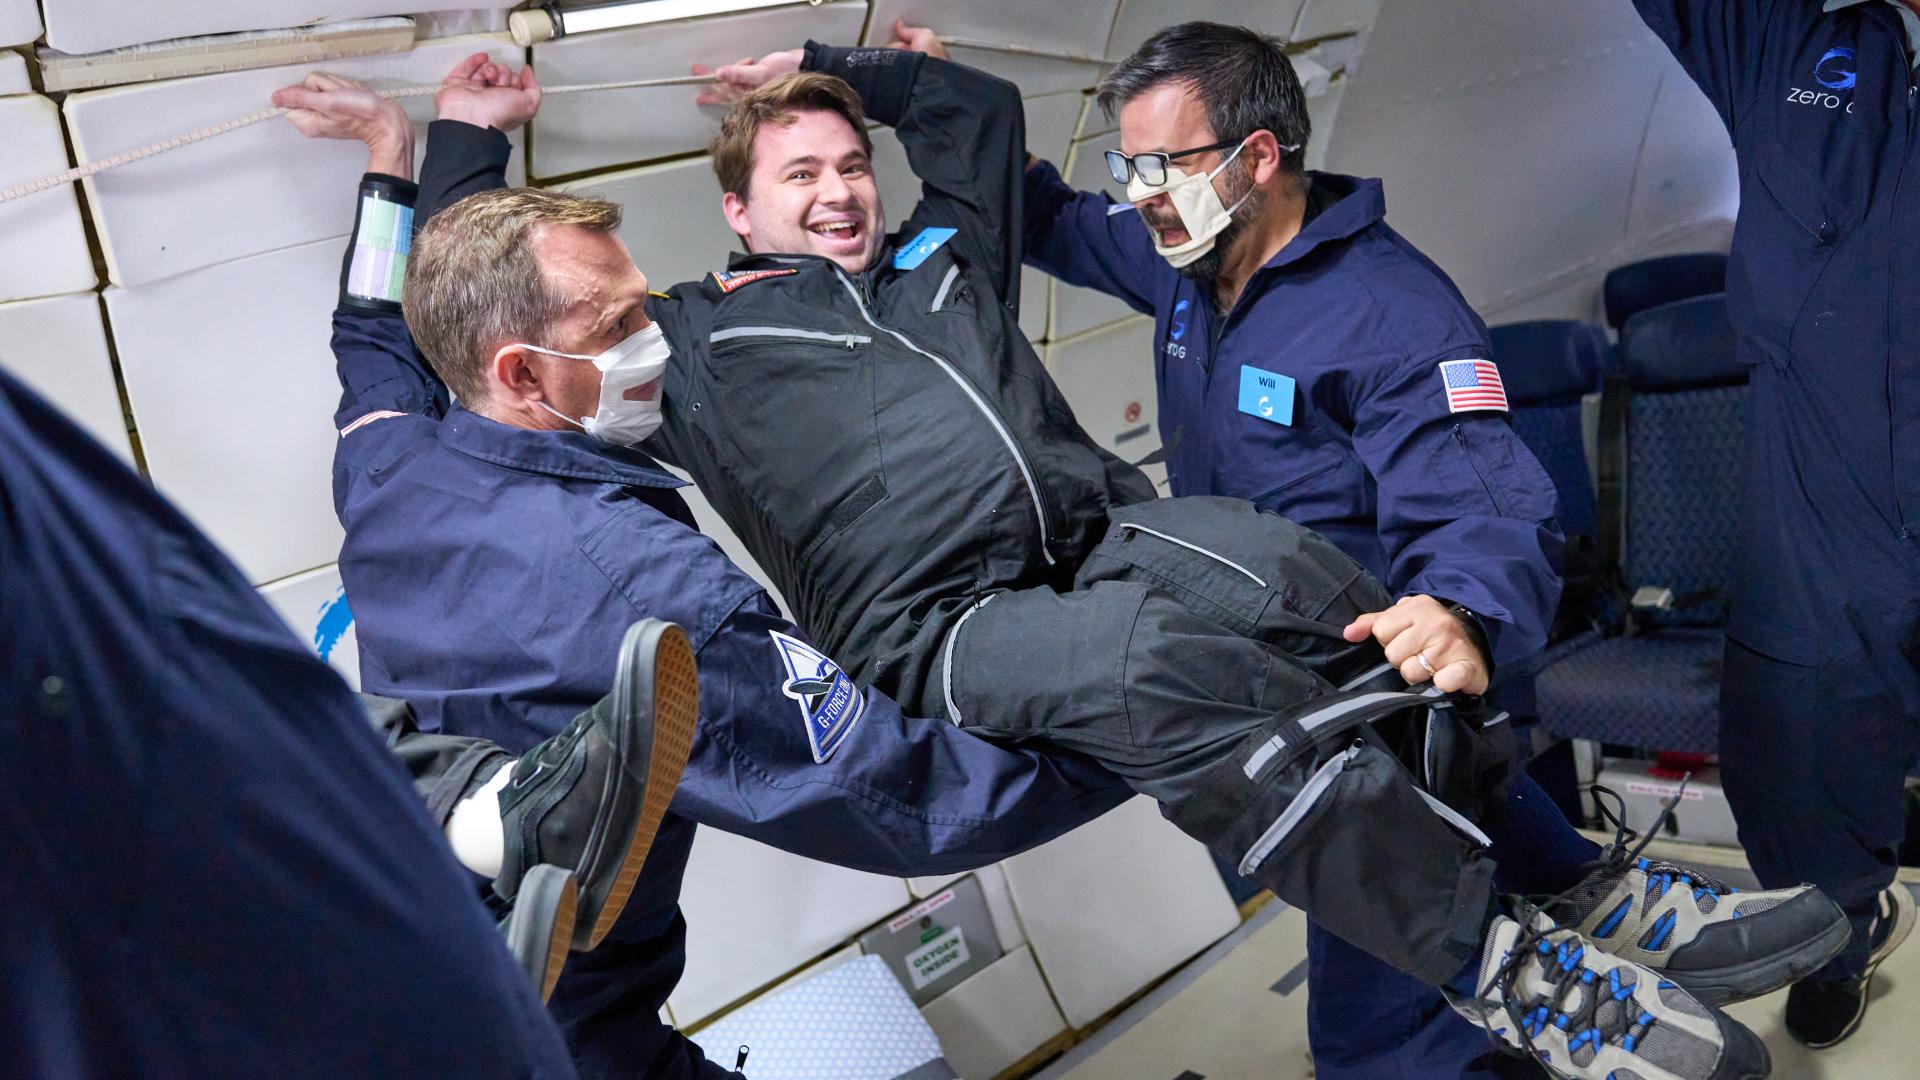 Two crew members help disabled man while floating in space (Photo: AstroAccess)